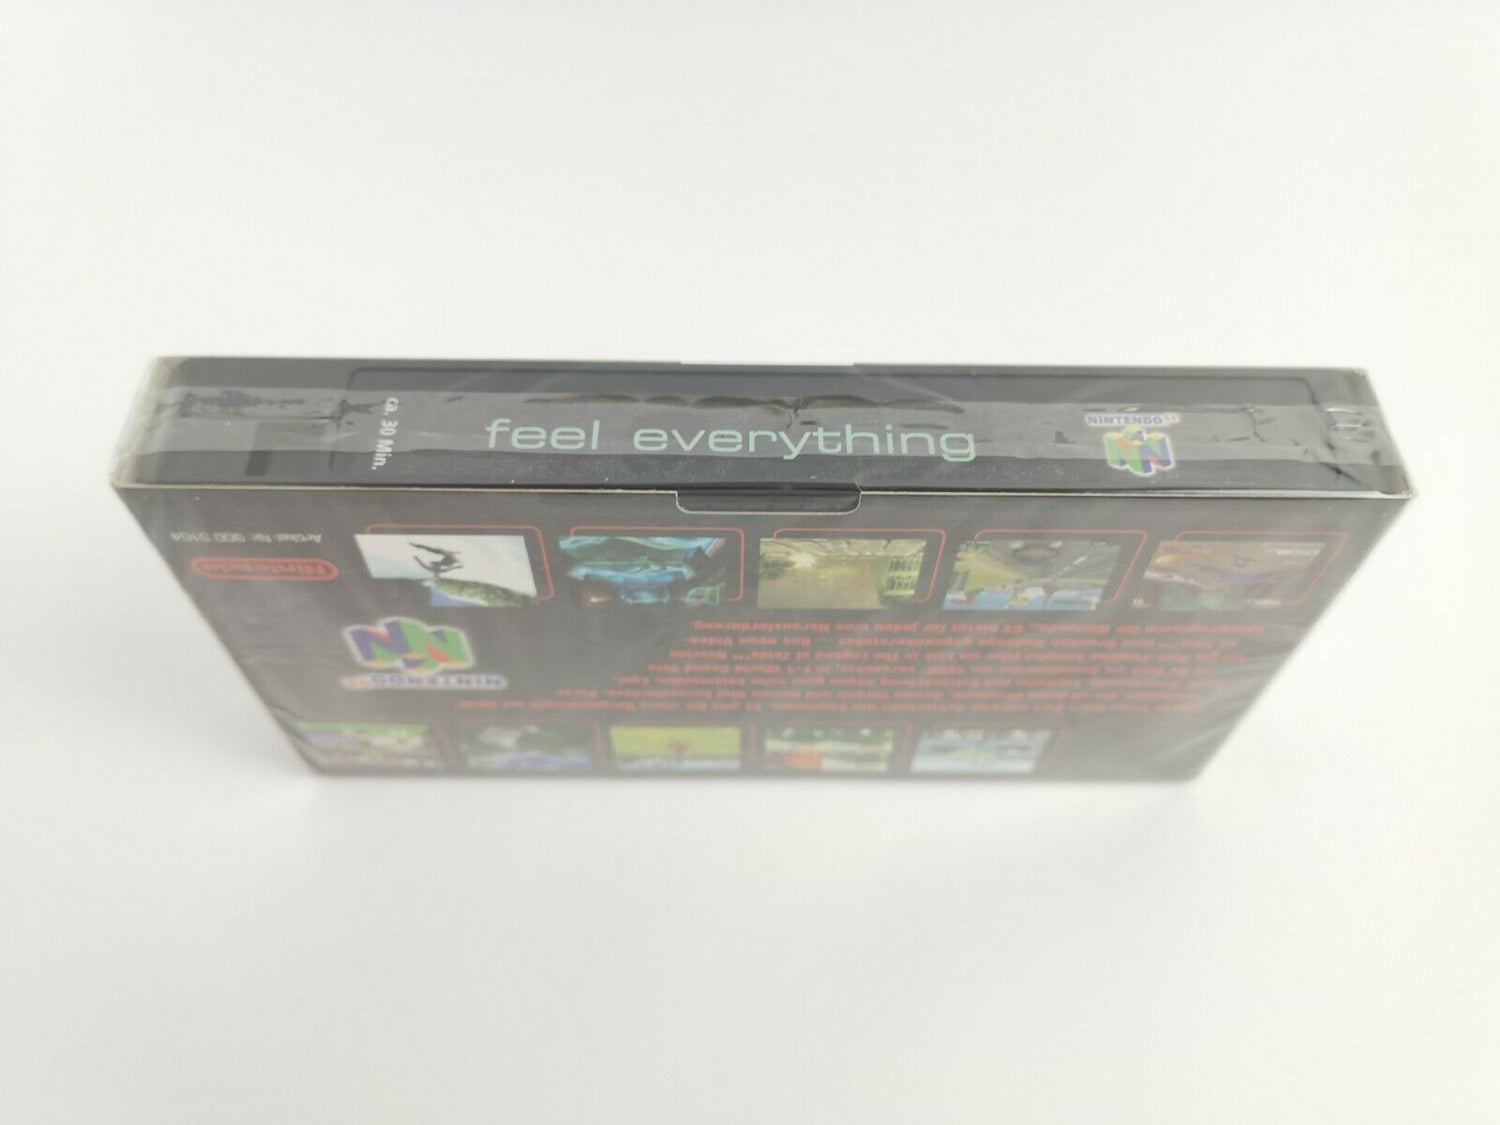 Nintendo 64 VHS promotional video | N64 | Sealed | New | Feel everything